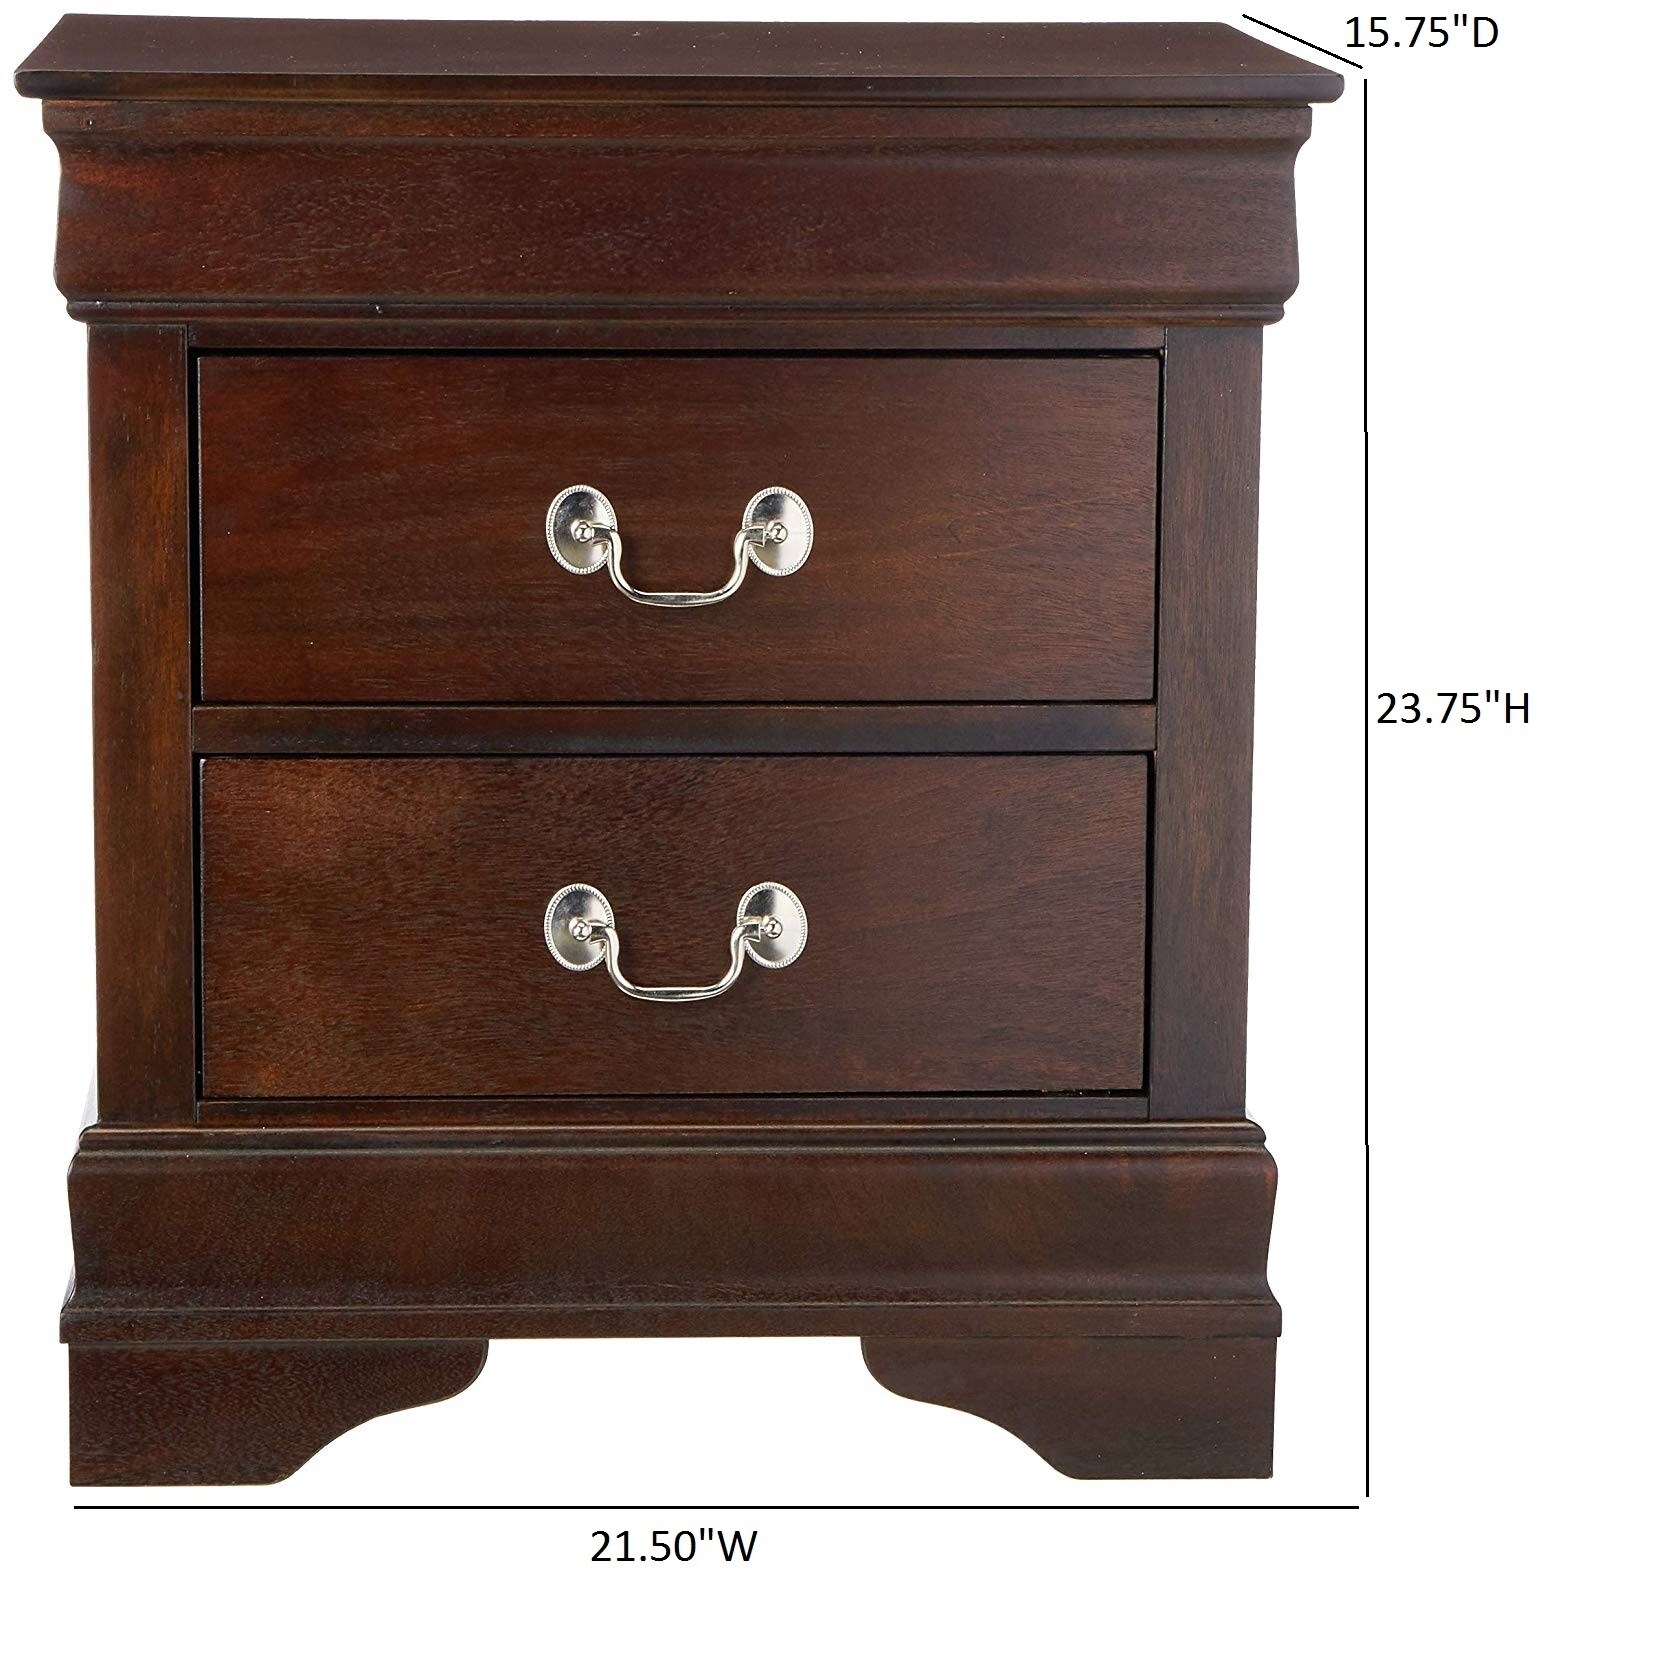 The Louis Philippe Traditional Warm Brown Chest sold at Discount